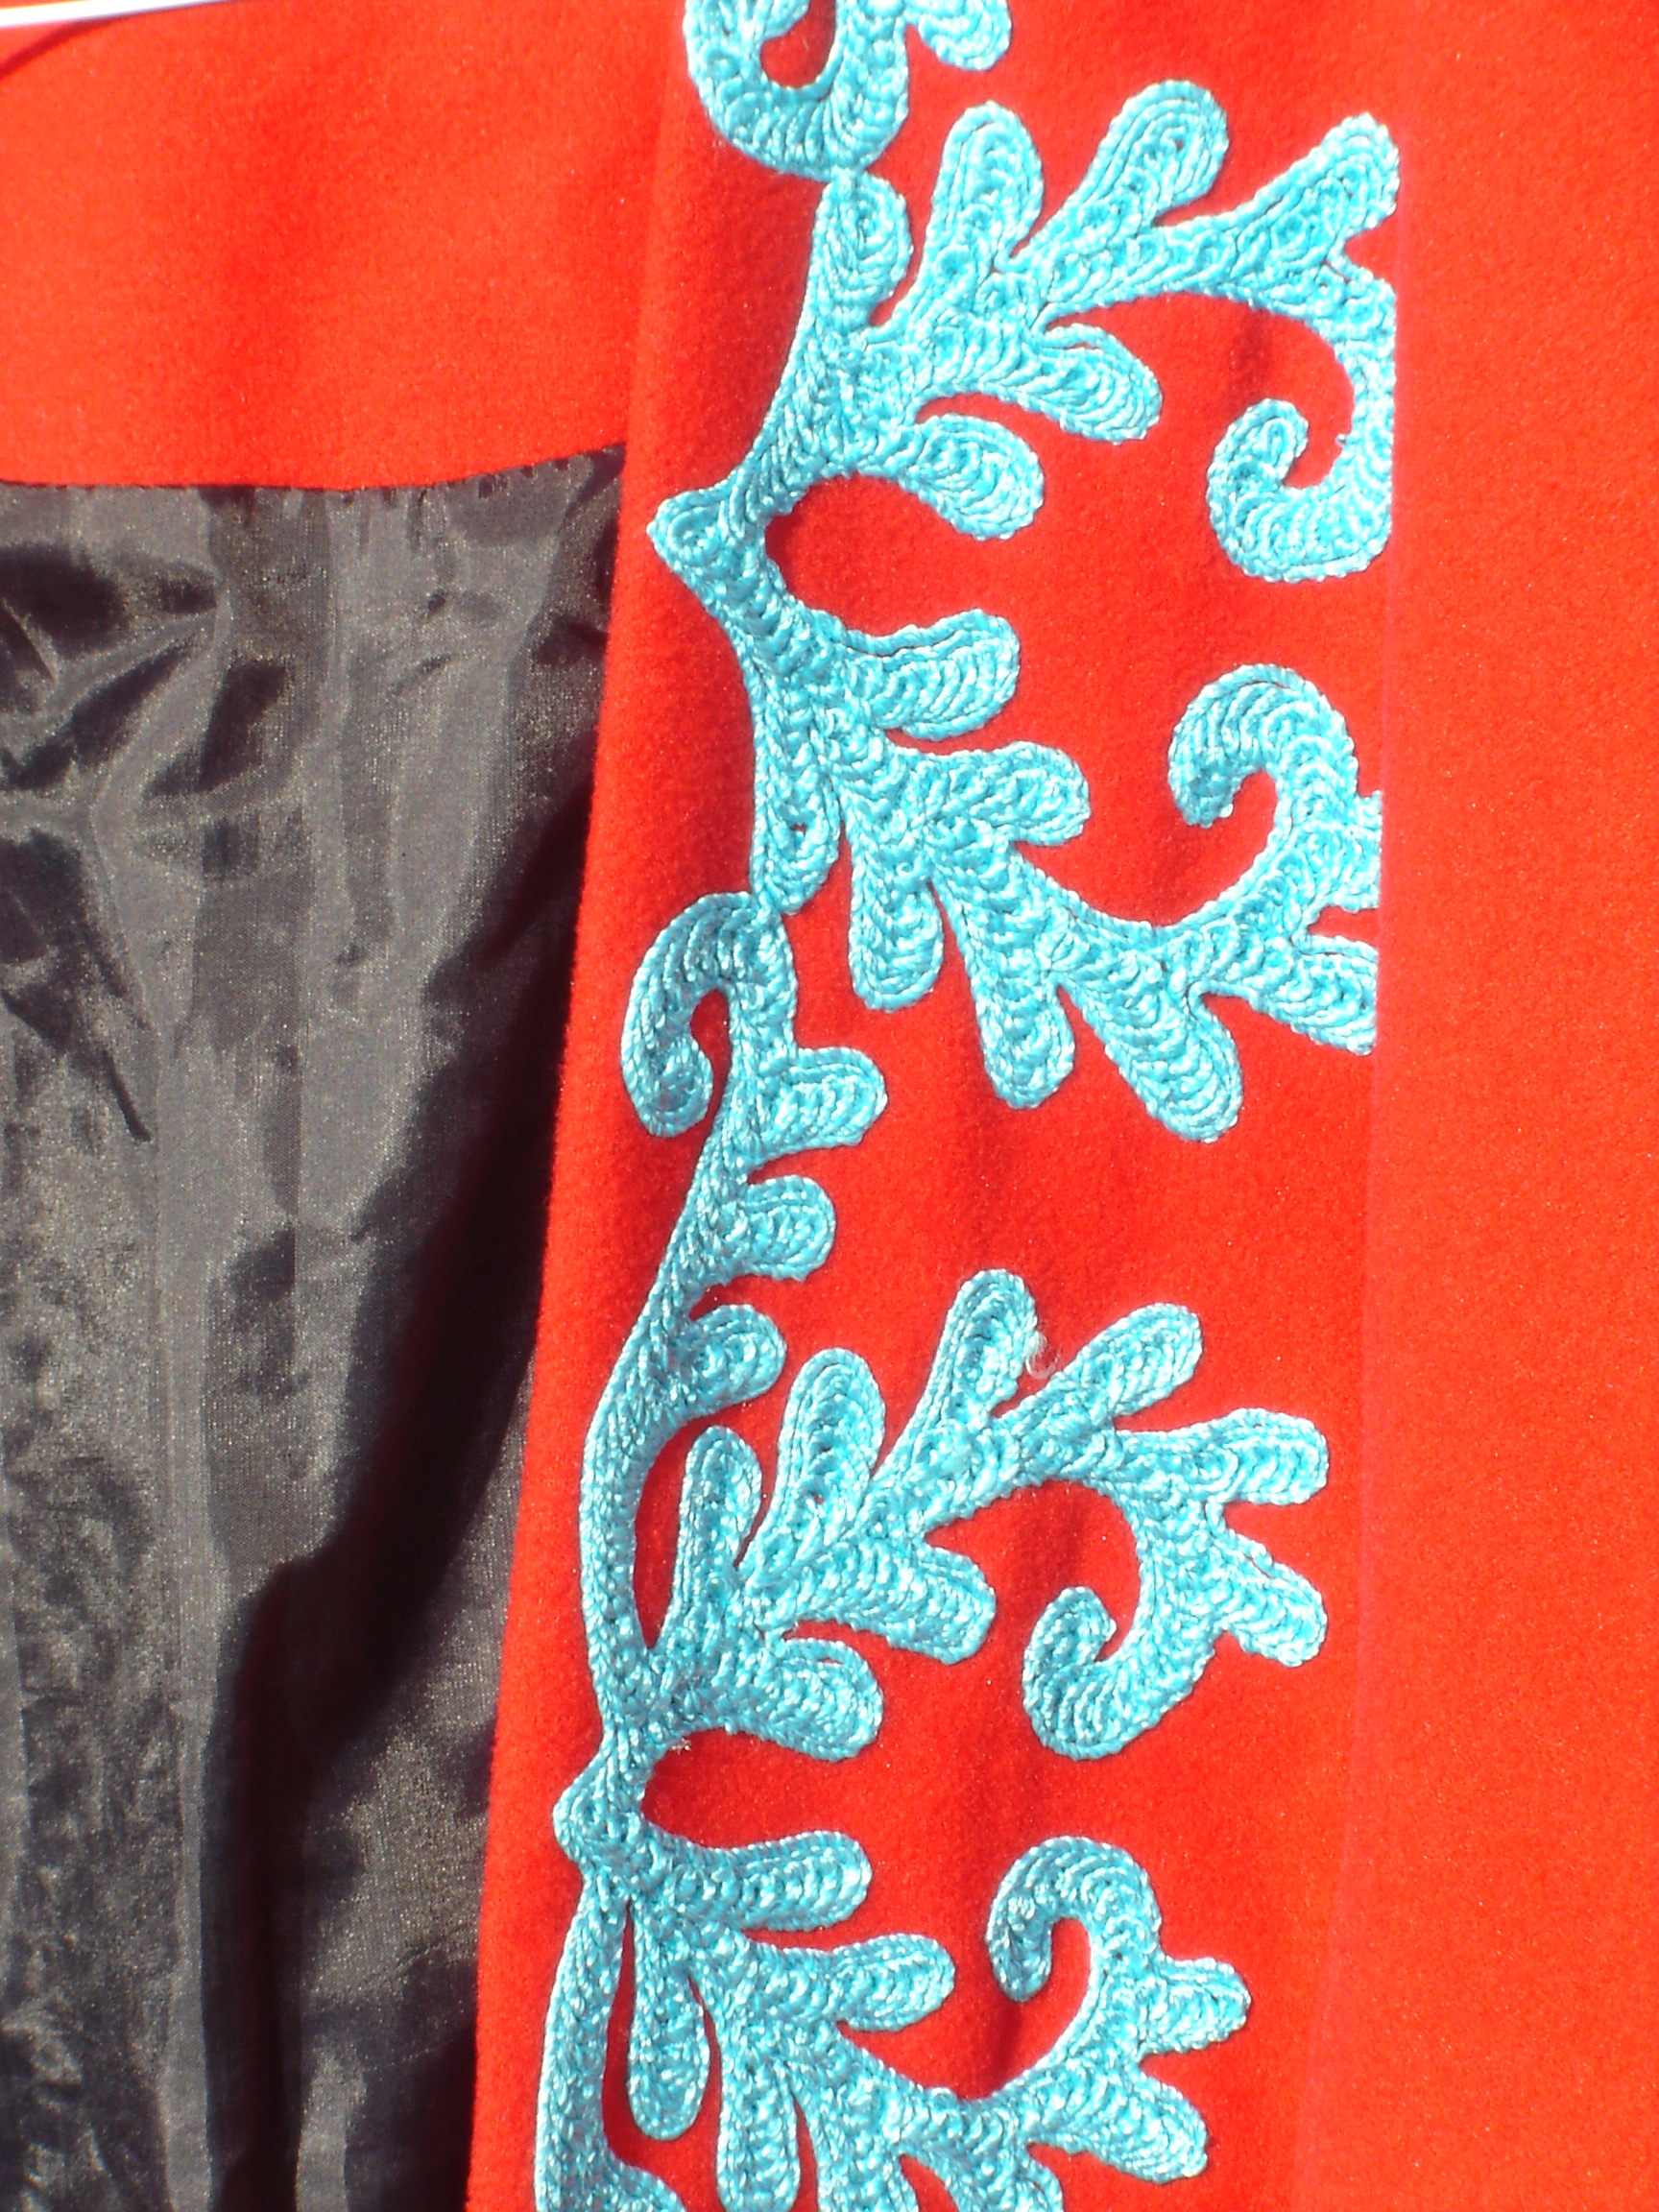 Splendid red and turquoise coat, from Unicorn, 5 Ship Street, Oxford